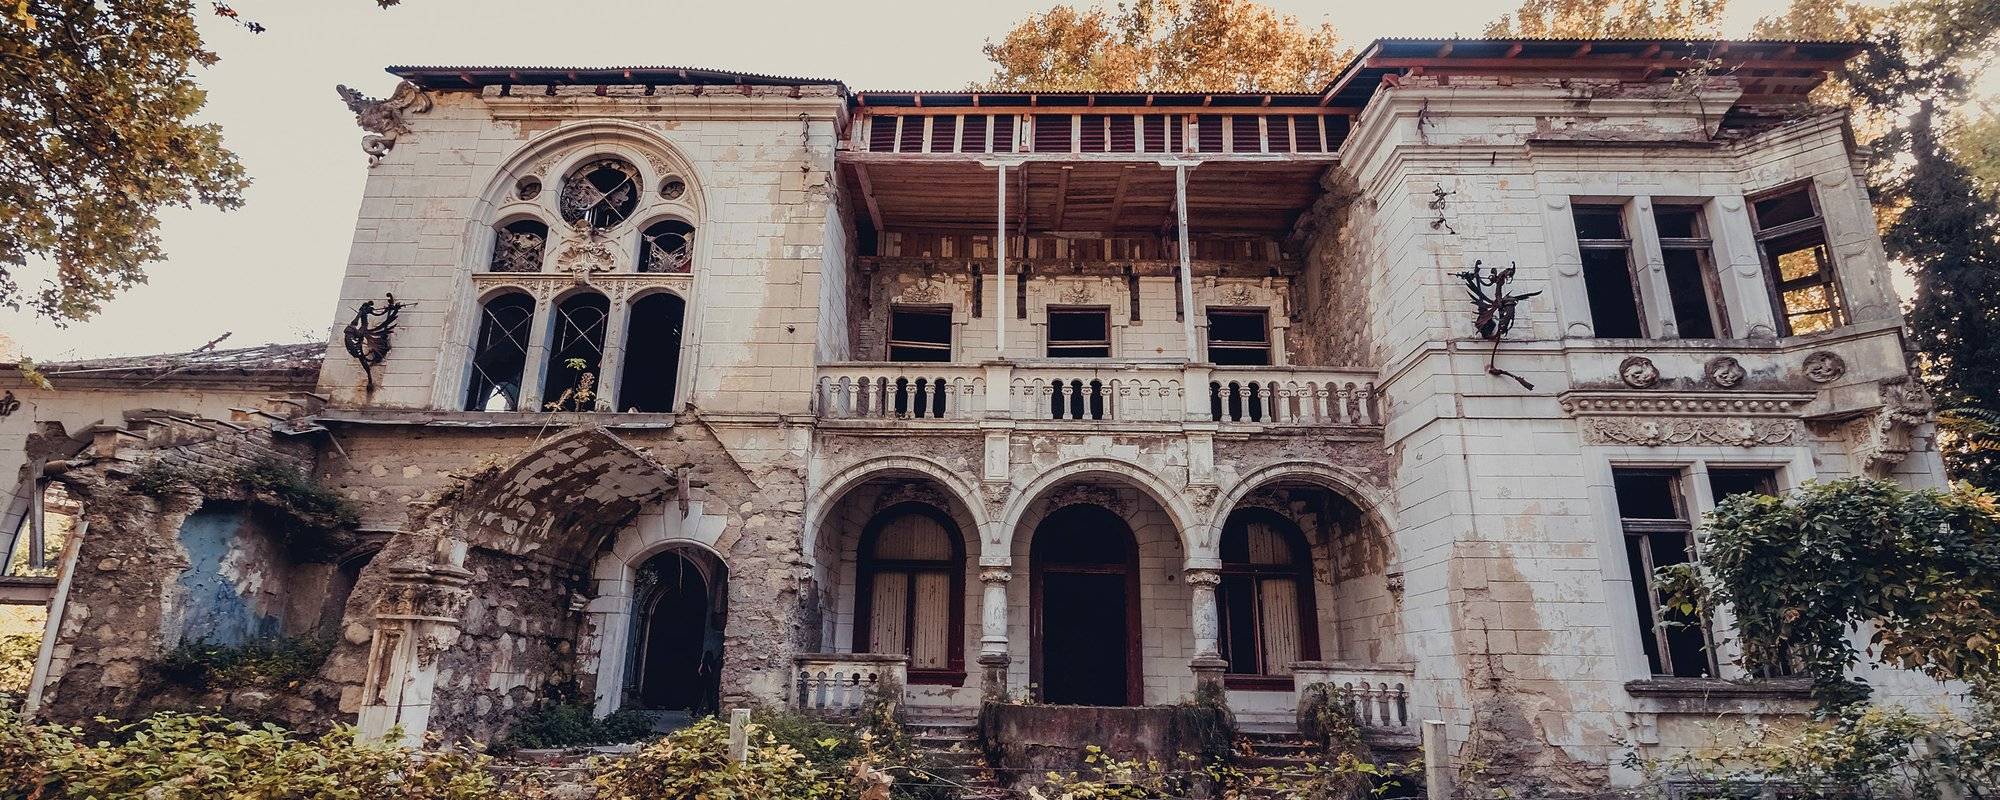 Špicer Family Palace - Abandoned Buildings 